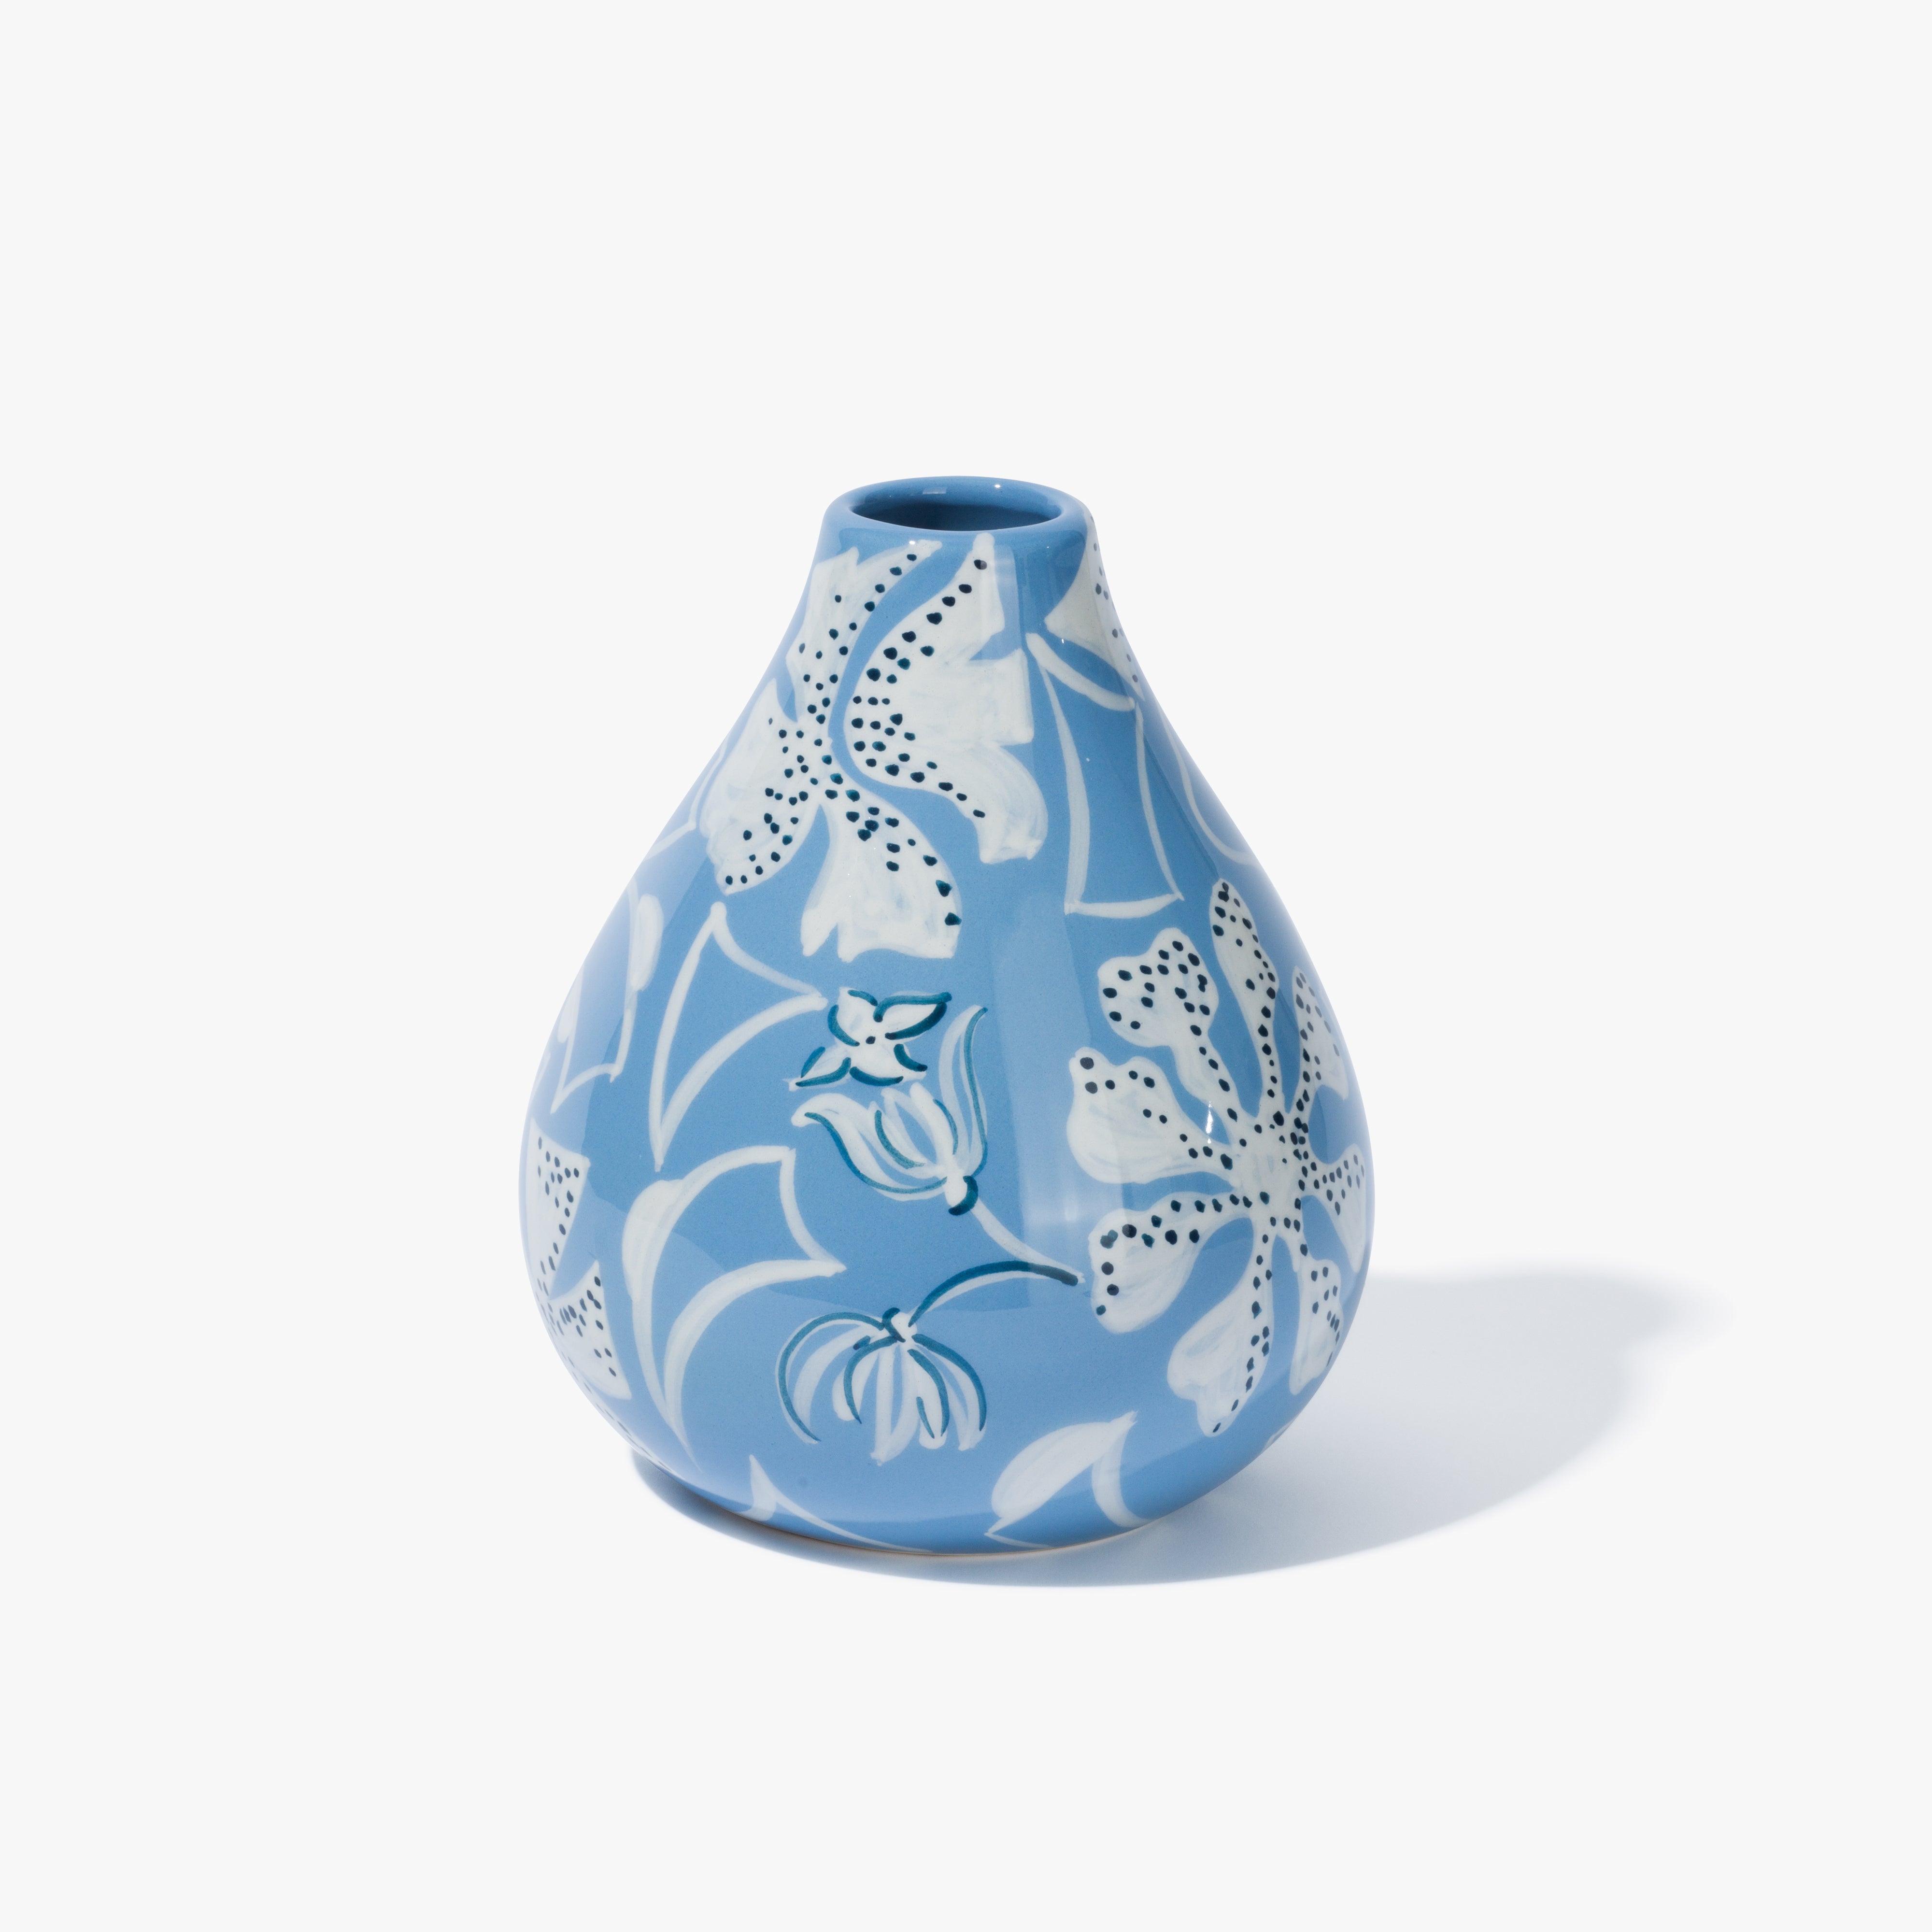 A light blue and white floral patterned base in a  bulb shape with a white pattern on a light blue background.